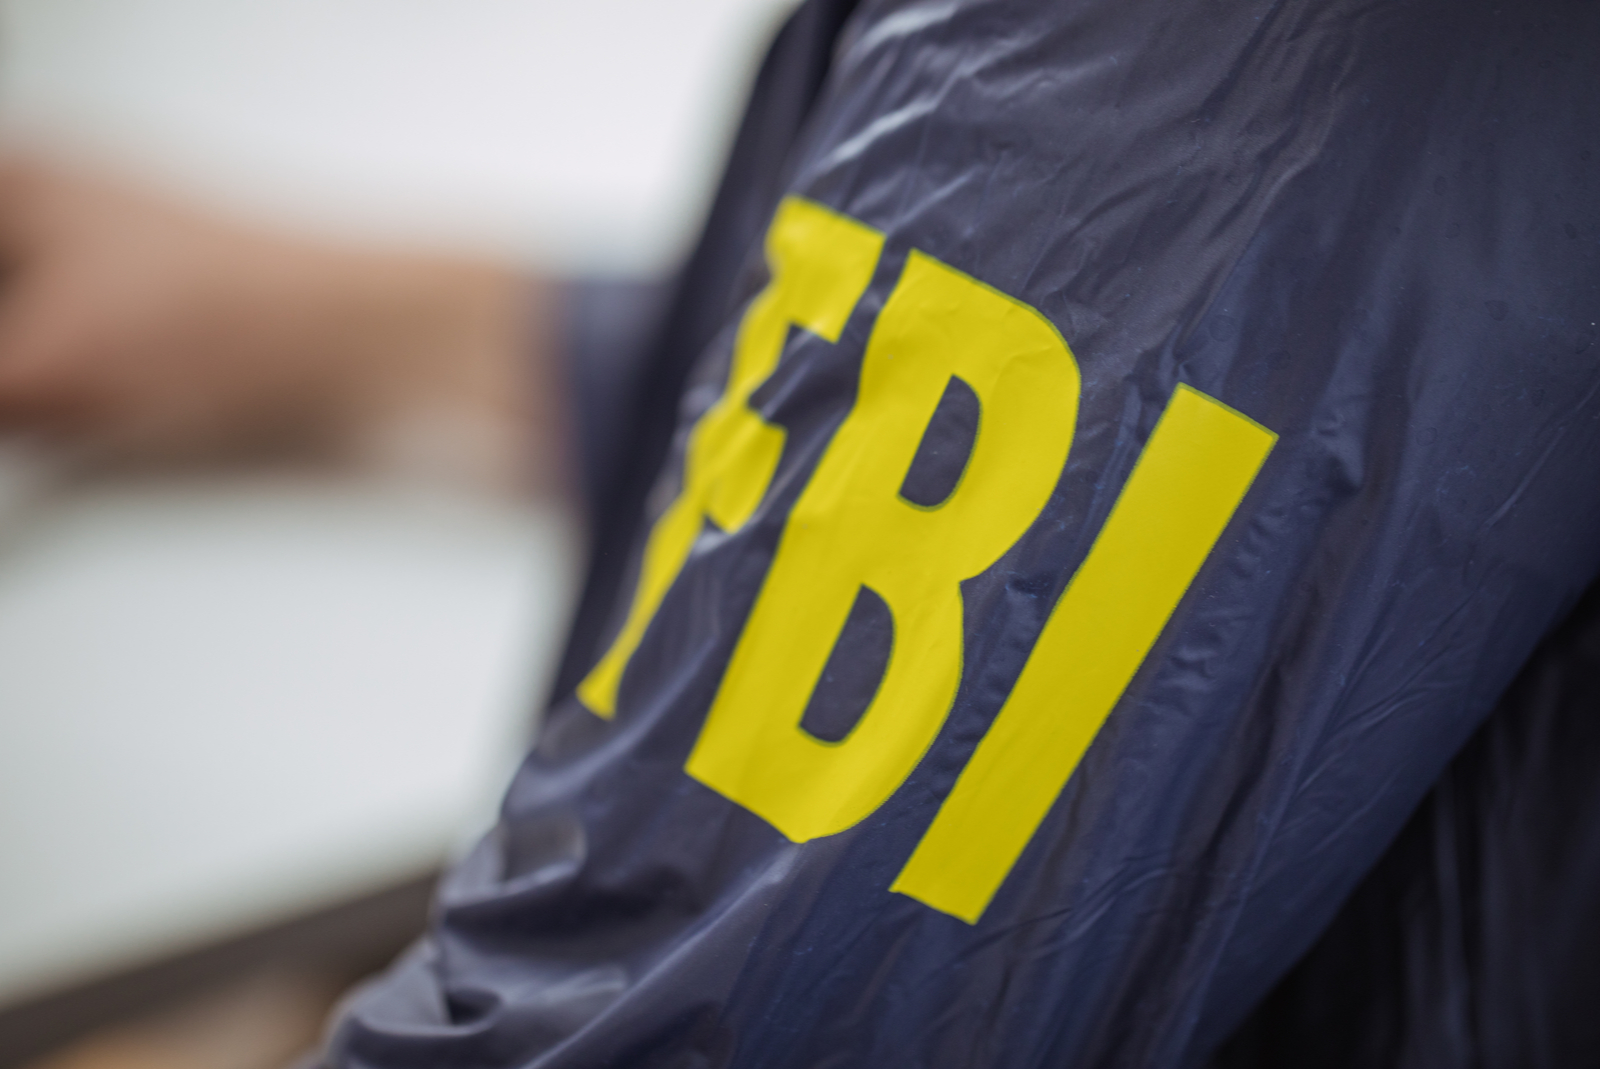 fbi decision to withhold kaseya ransomware